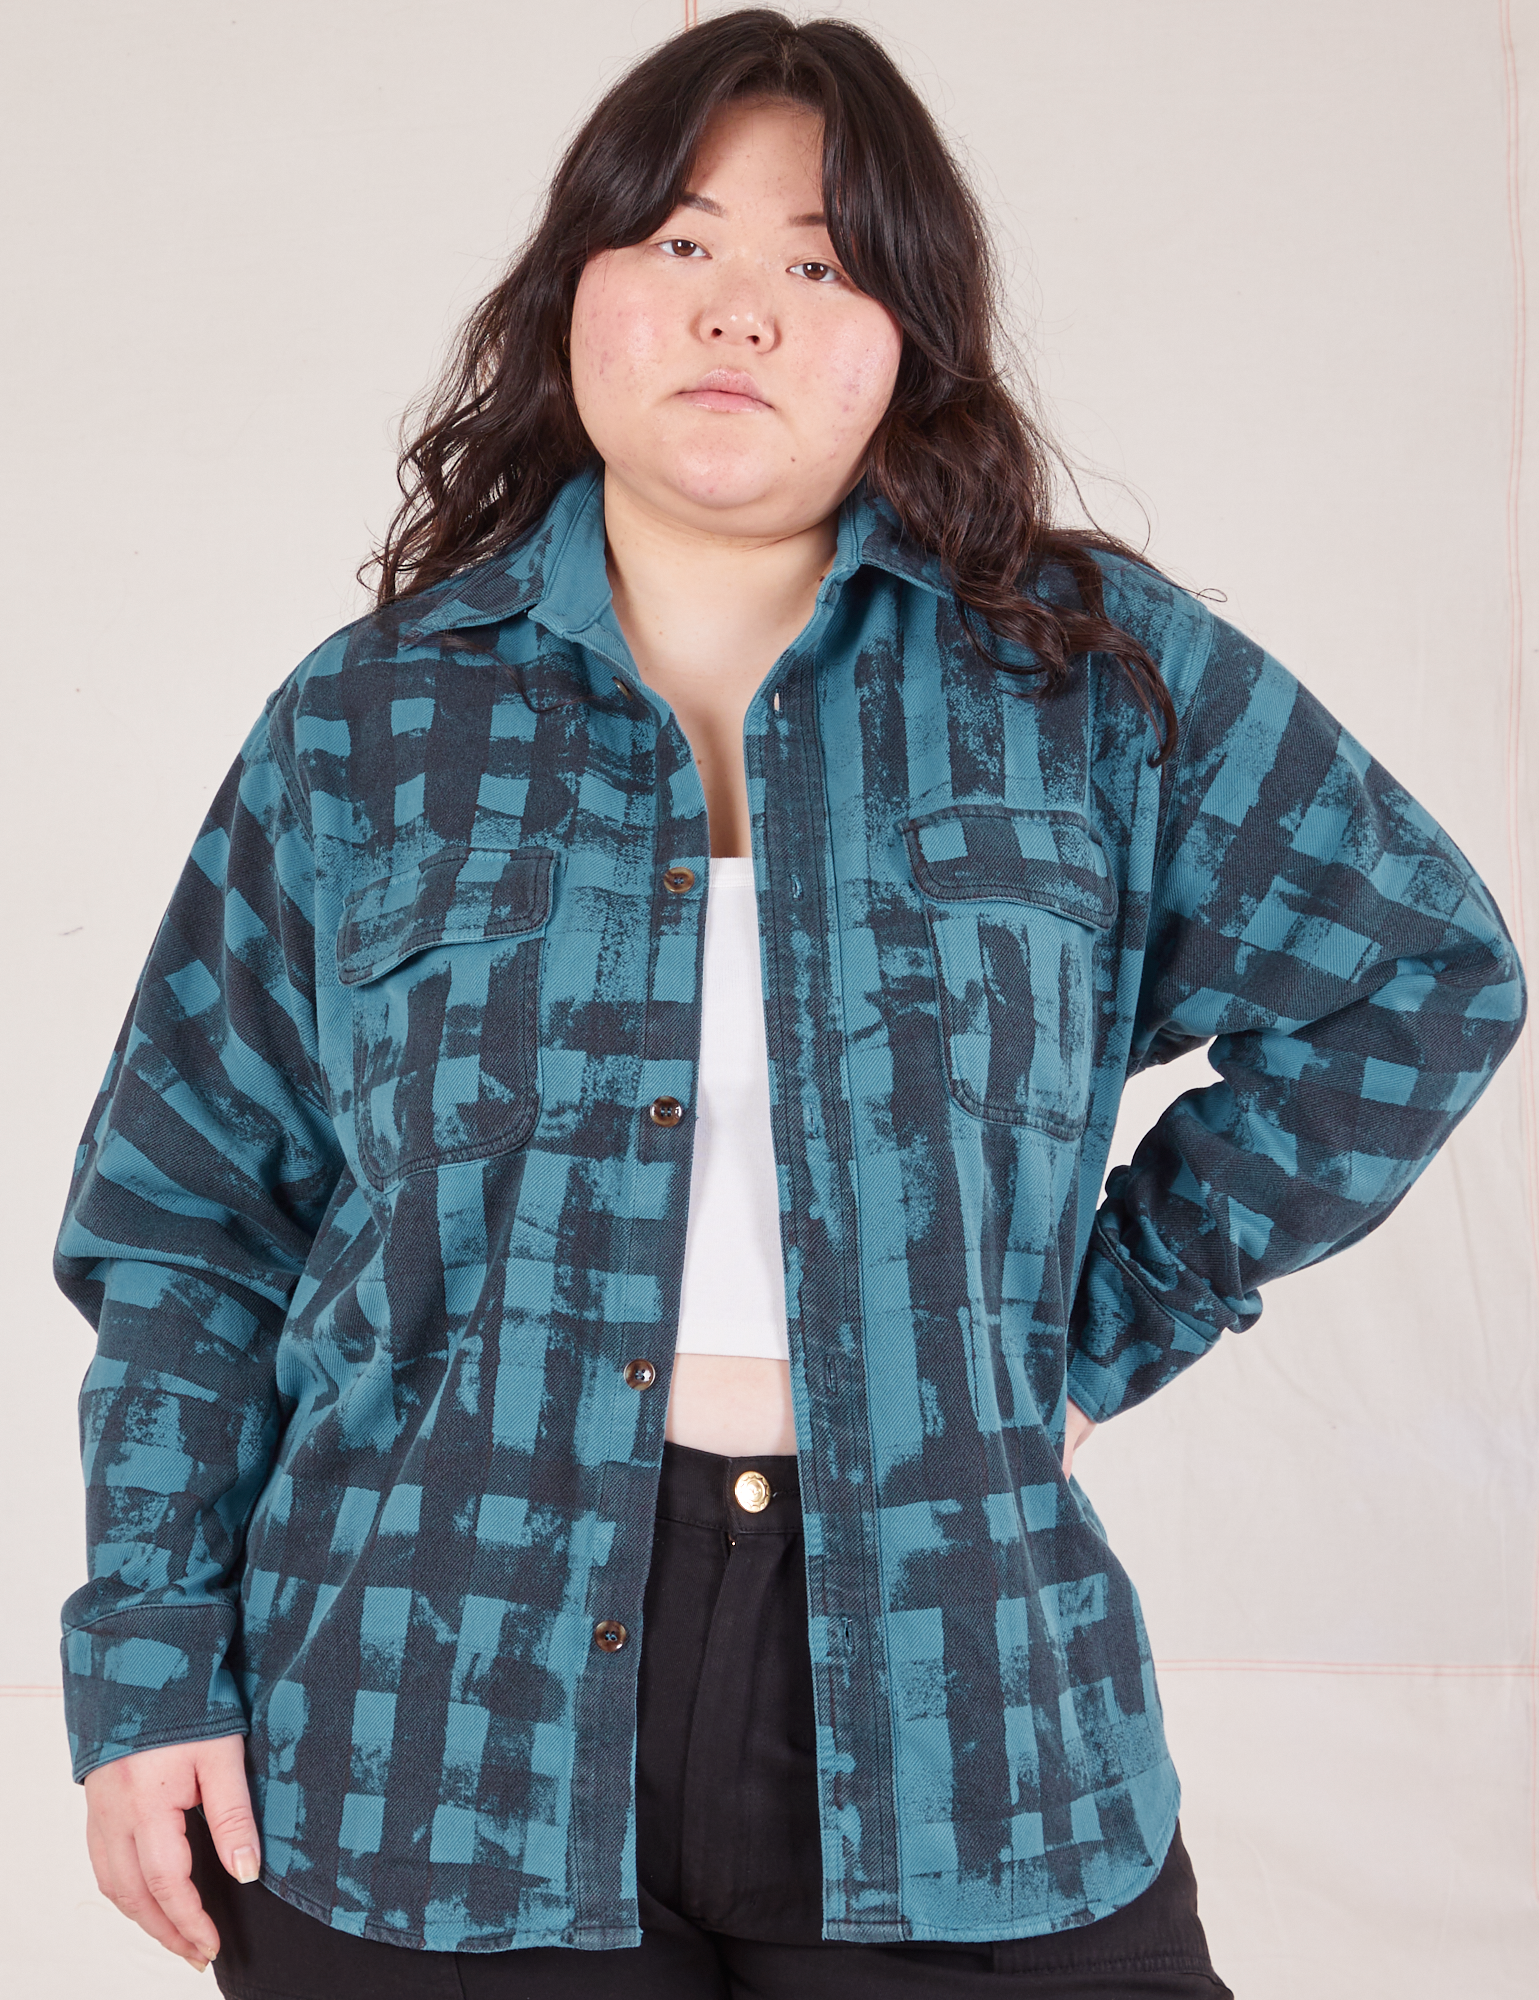 Ashley is wearing Plaid Flannel Overshirt in Marine Blue